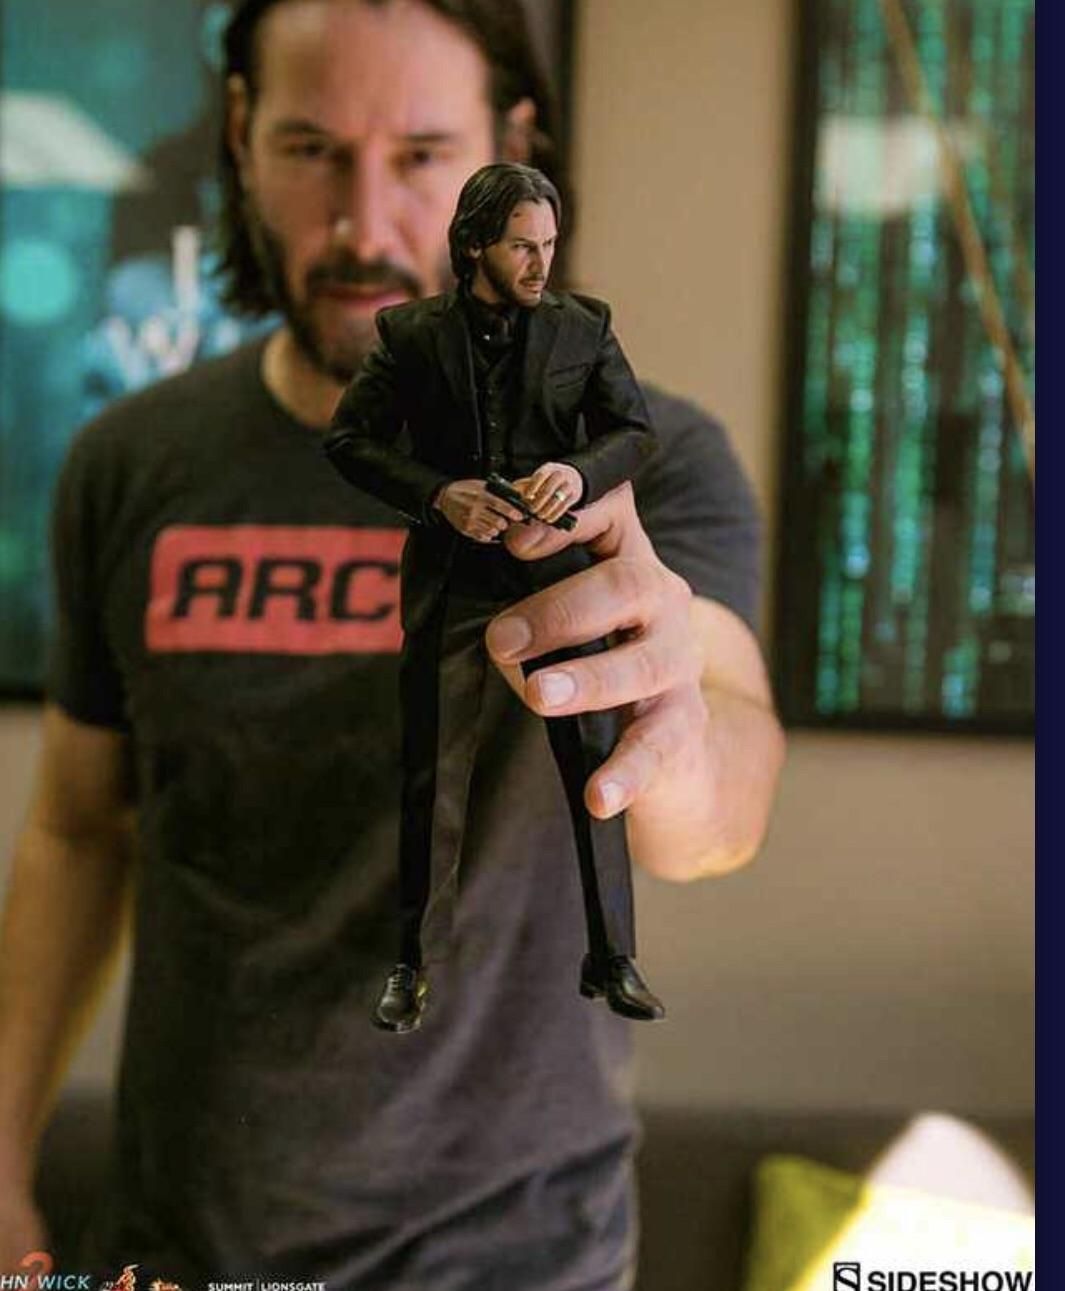 New pic released of Keanu Reeves playing with himself!